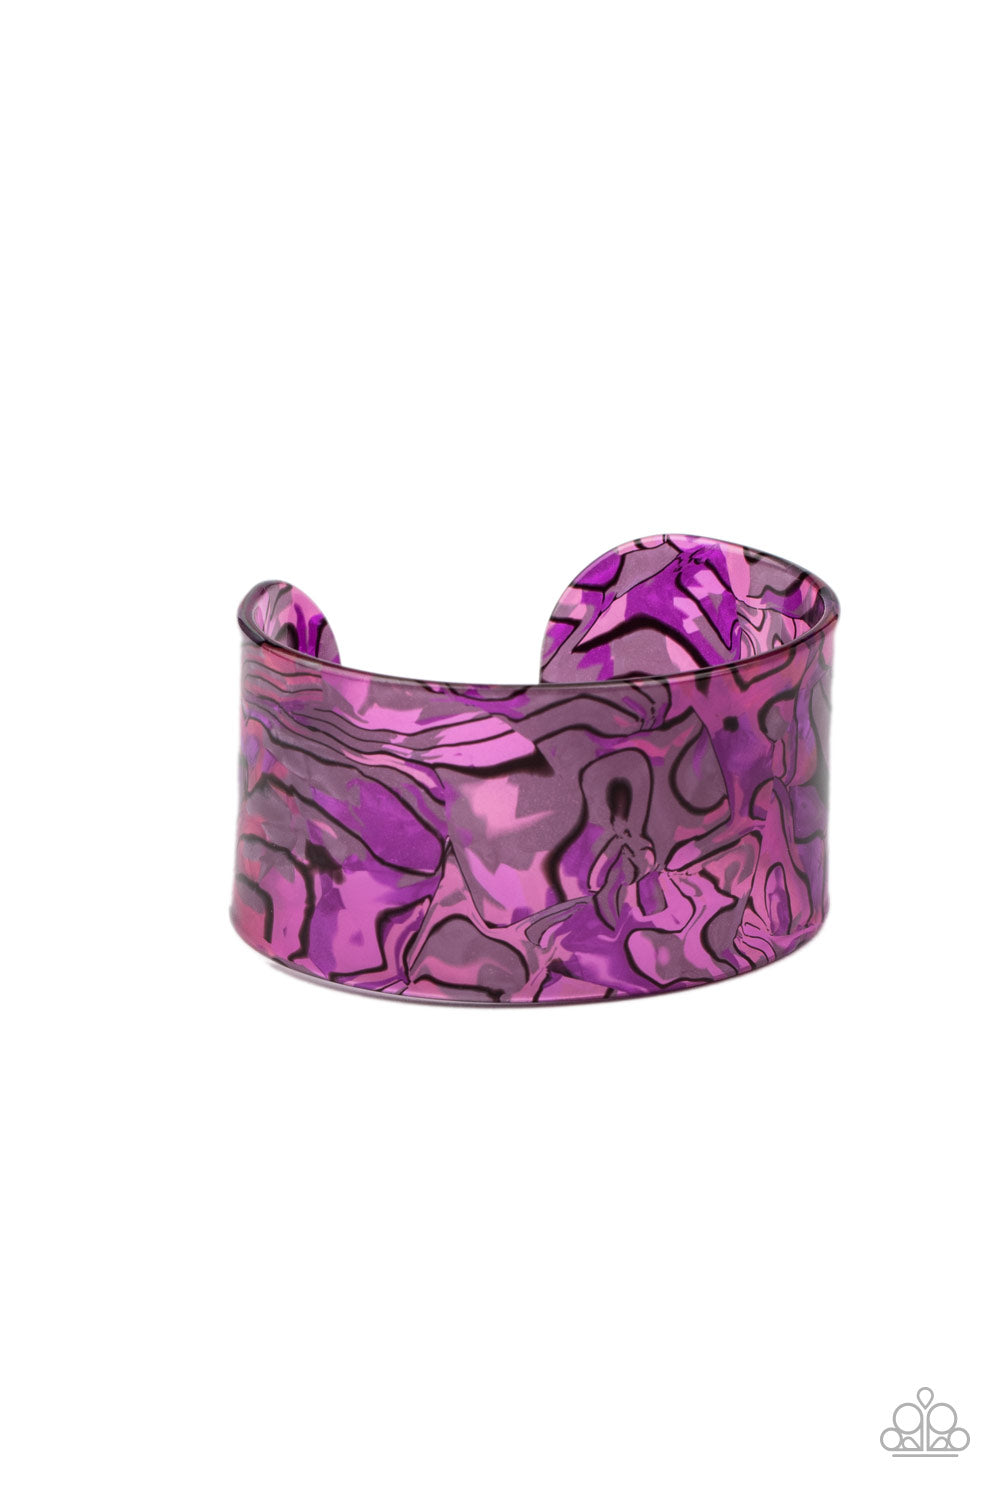 shop-sassy-affordable- cosmic-couture-purple-paparazzi-accessories